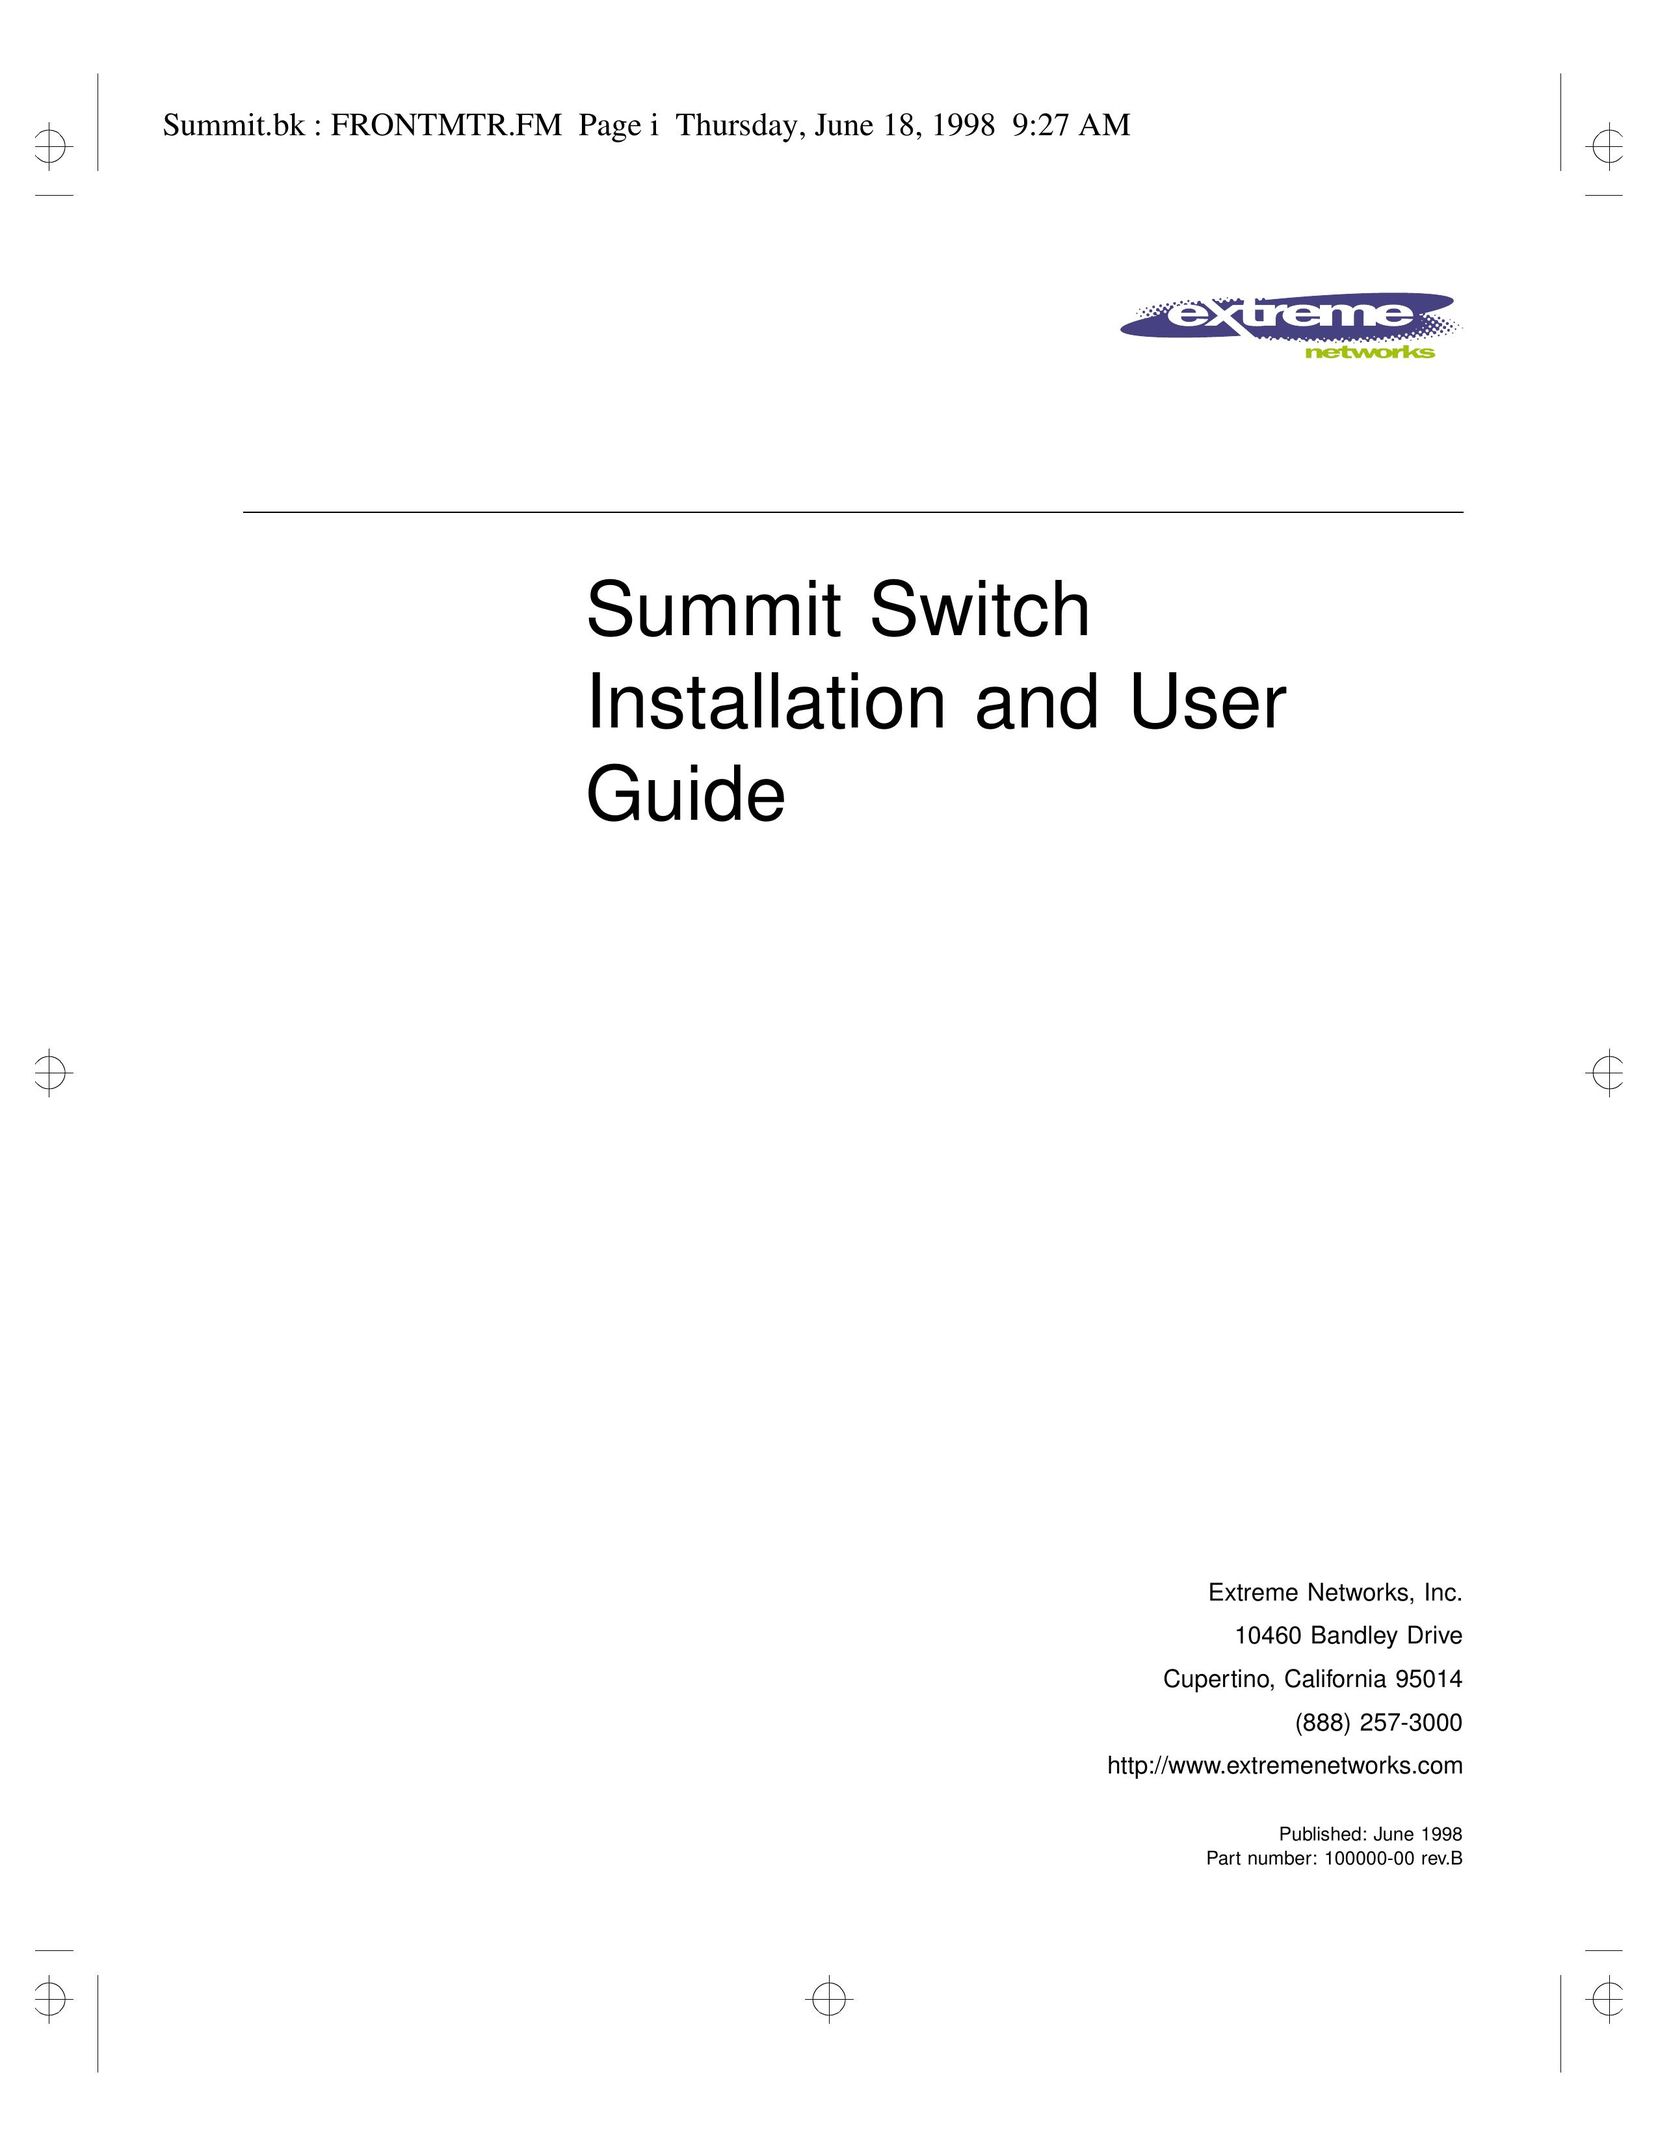 Extreme Networks Summit1 Switch User Manual